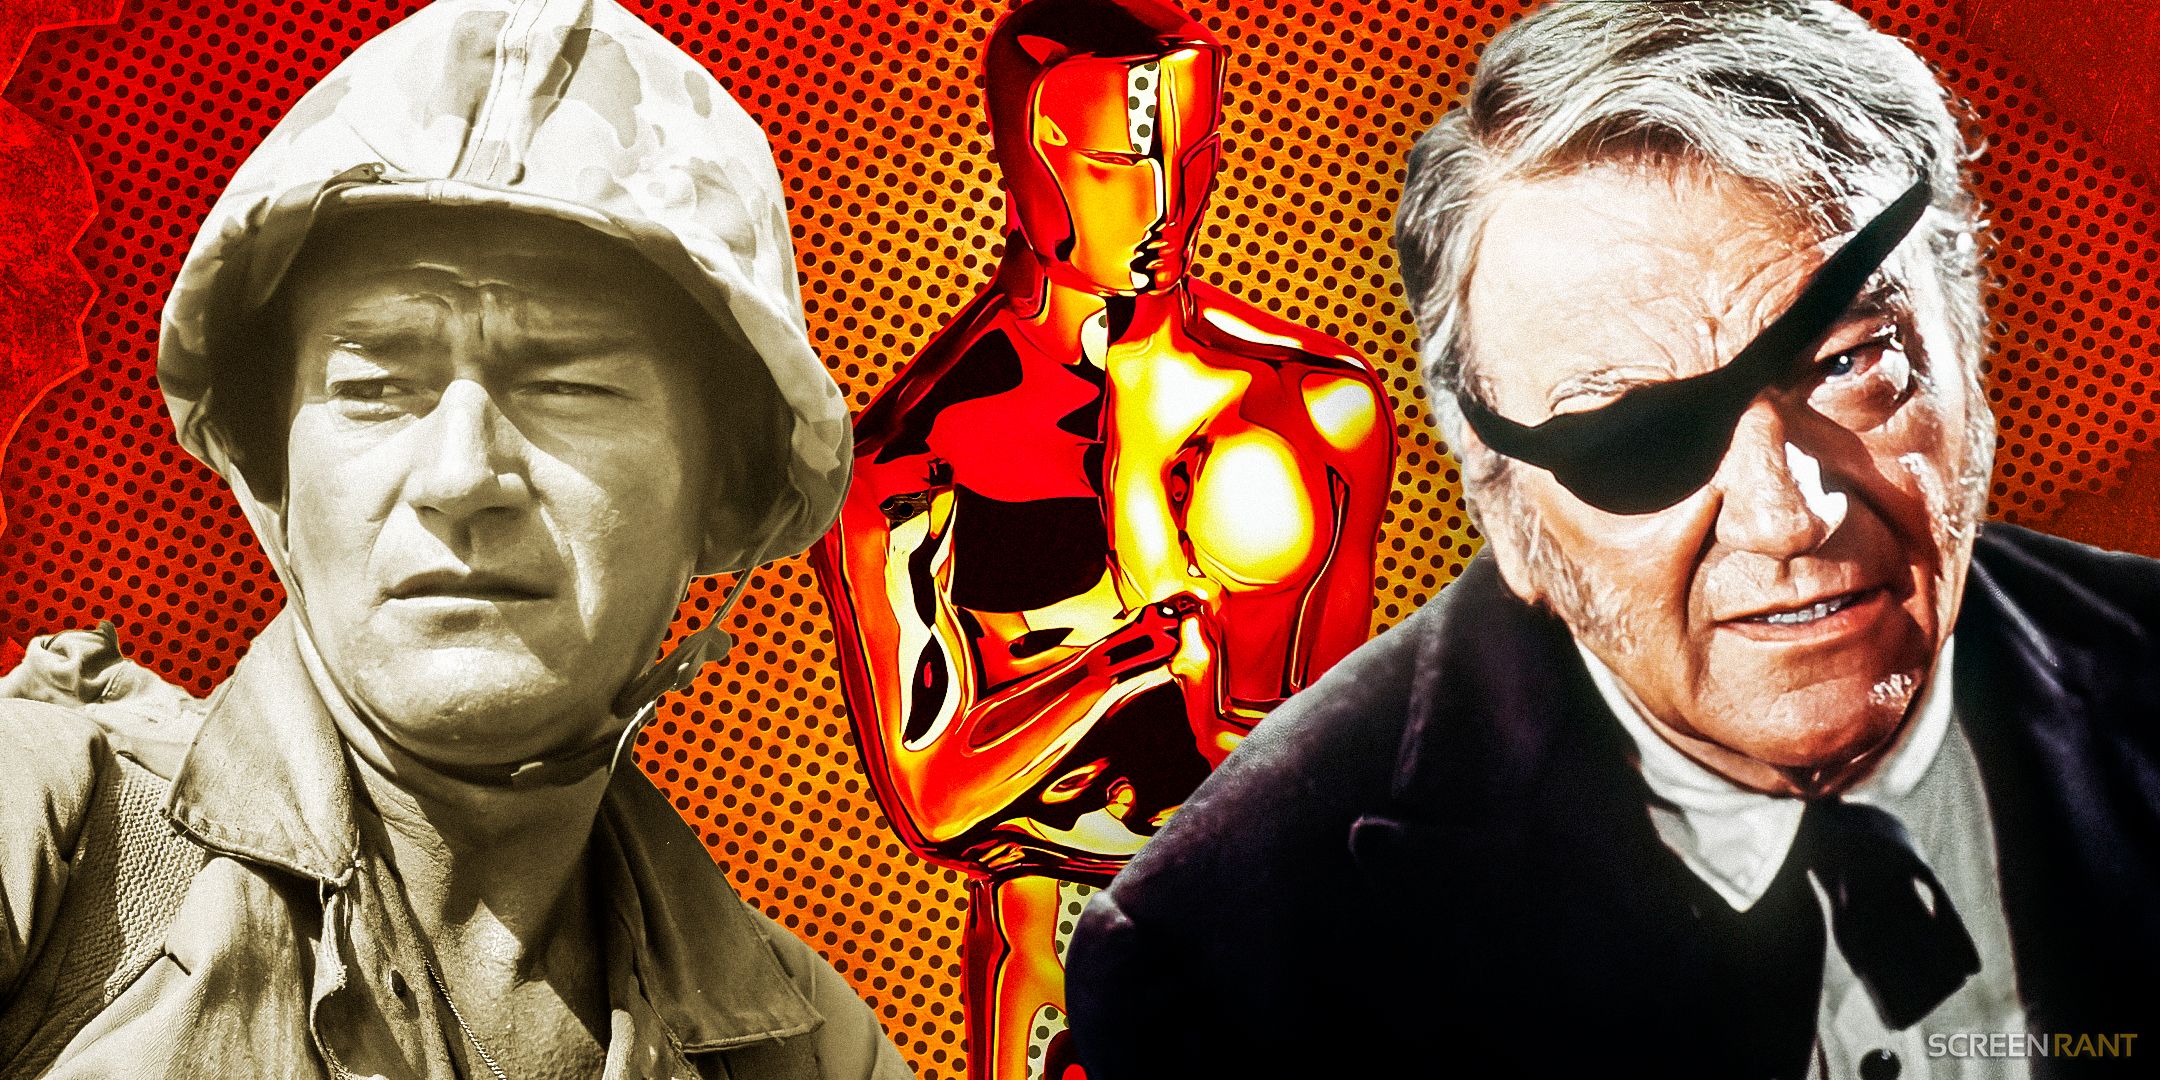 John Wayne as Stryker from Sands of Iwo Jima and as Rooster Cogburn from True Grit with an Oscar statue